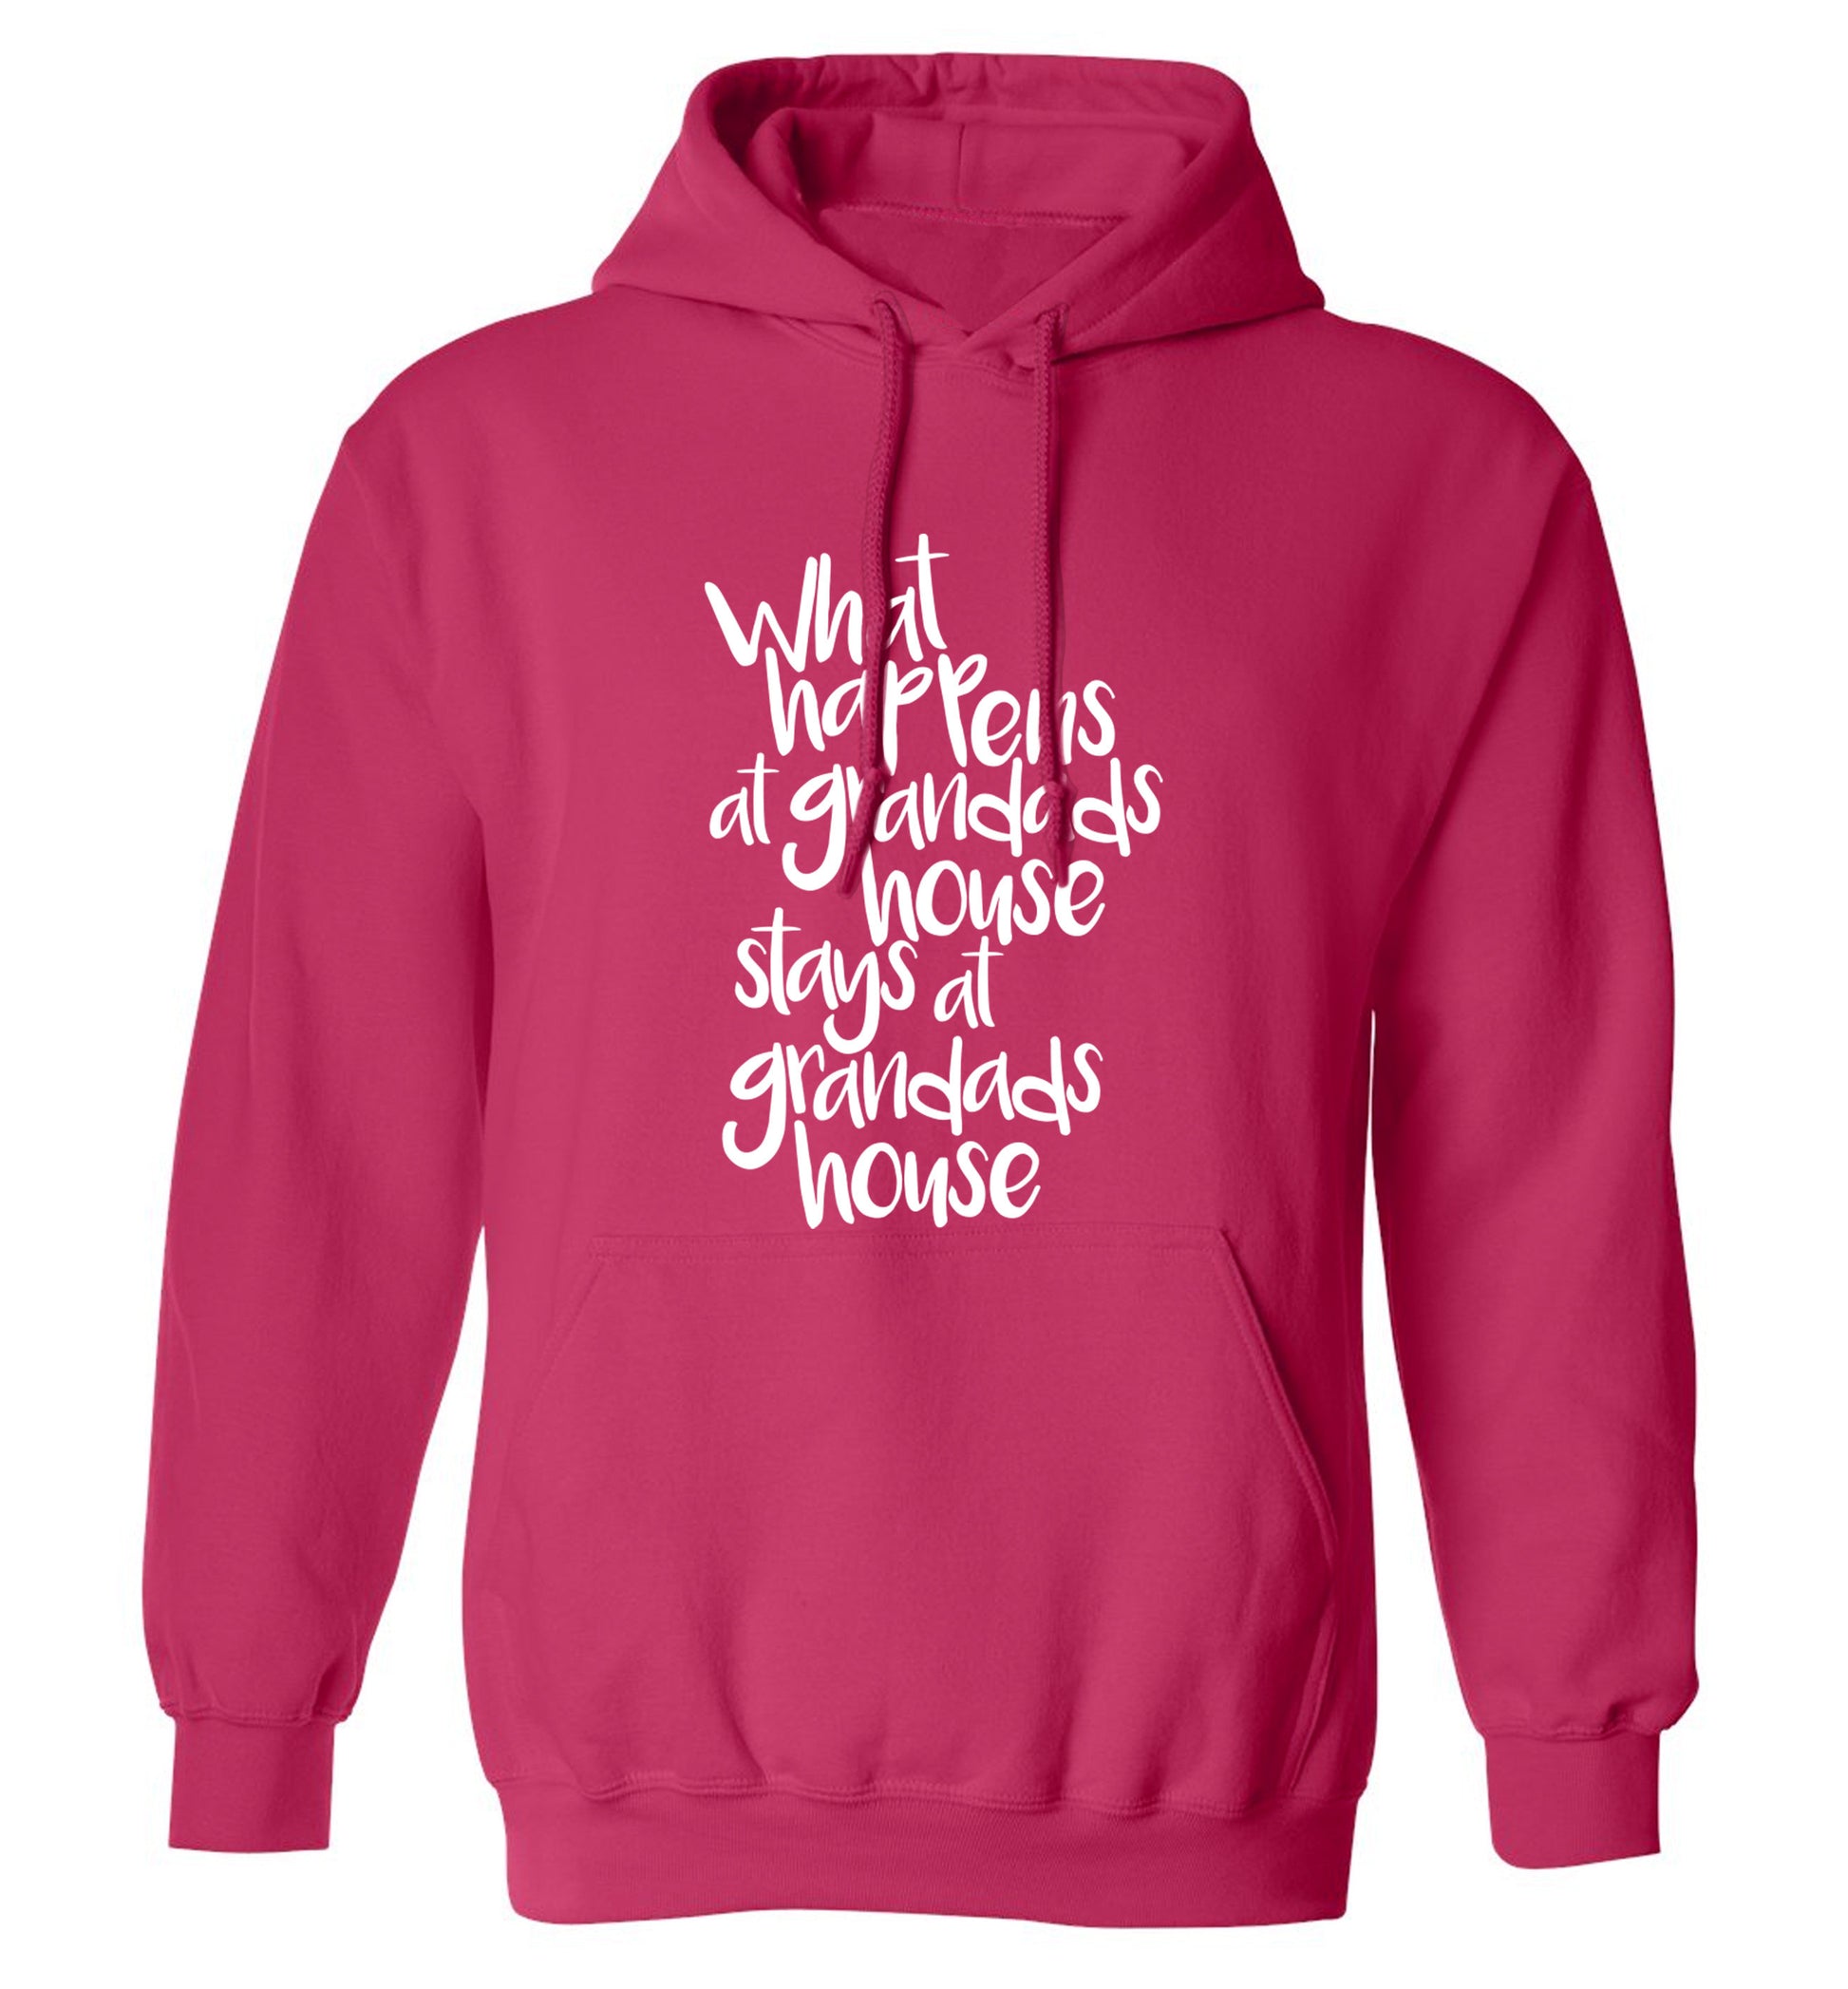 What happens at grandads house stays at grandads house adults unisex pink hoodie 2XL